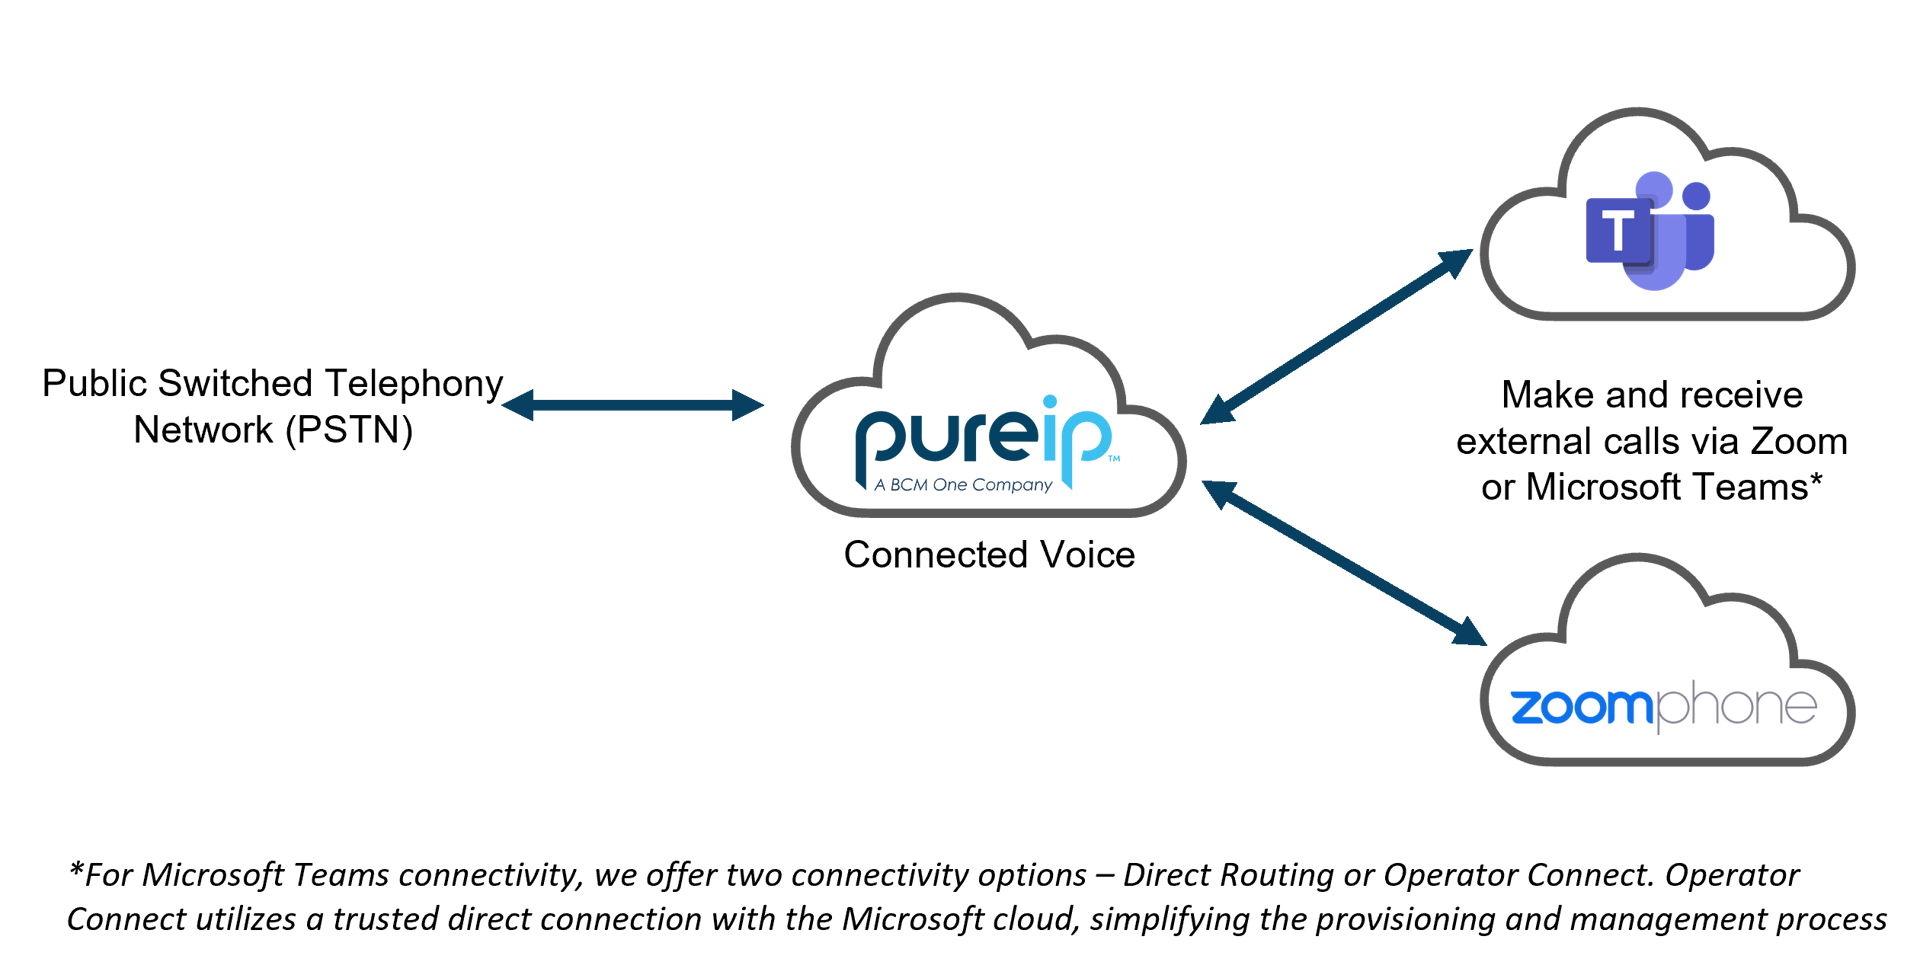 Connected Voice image